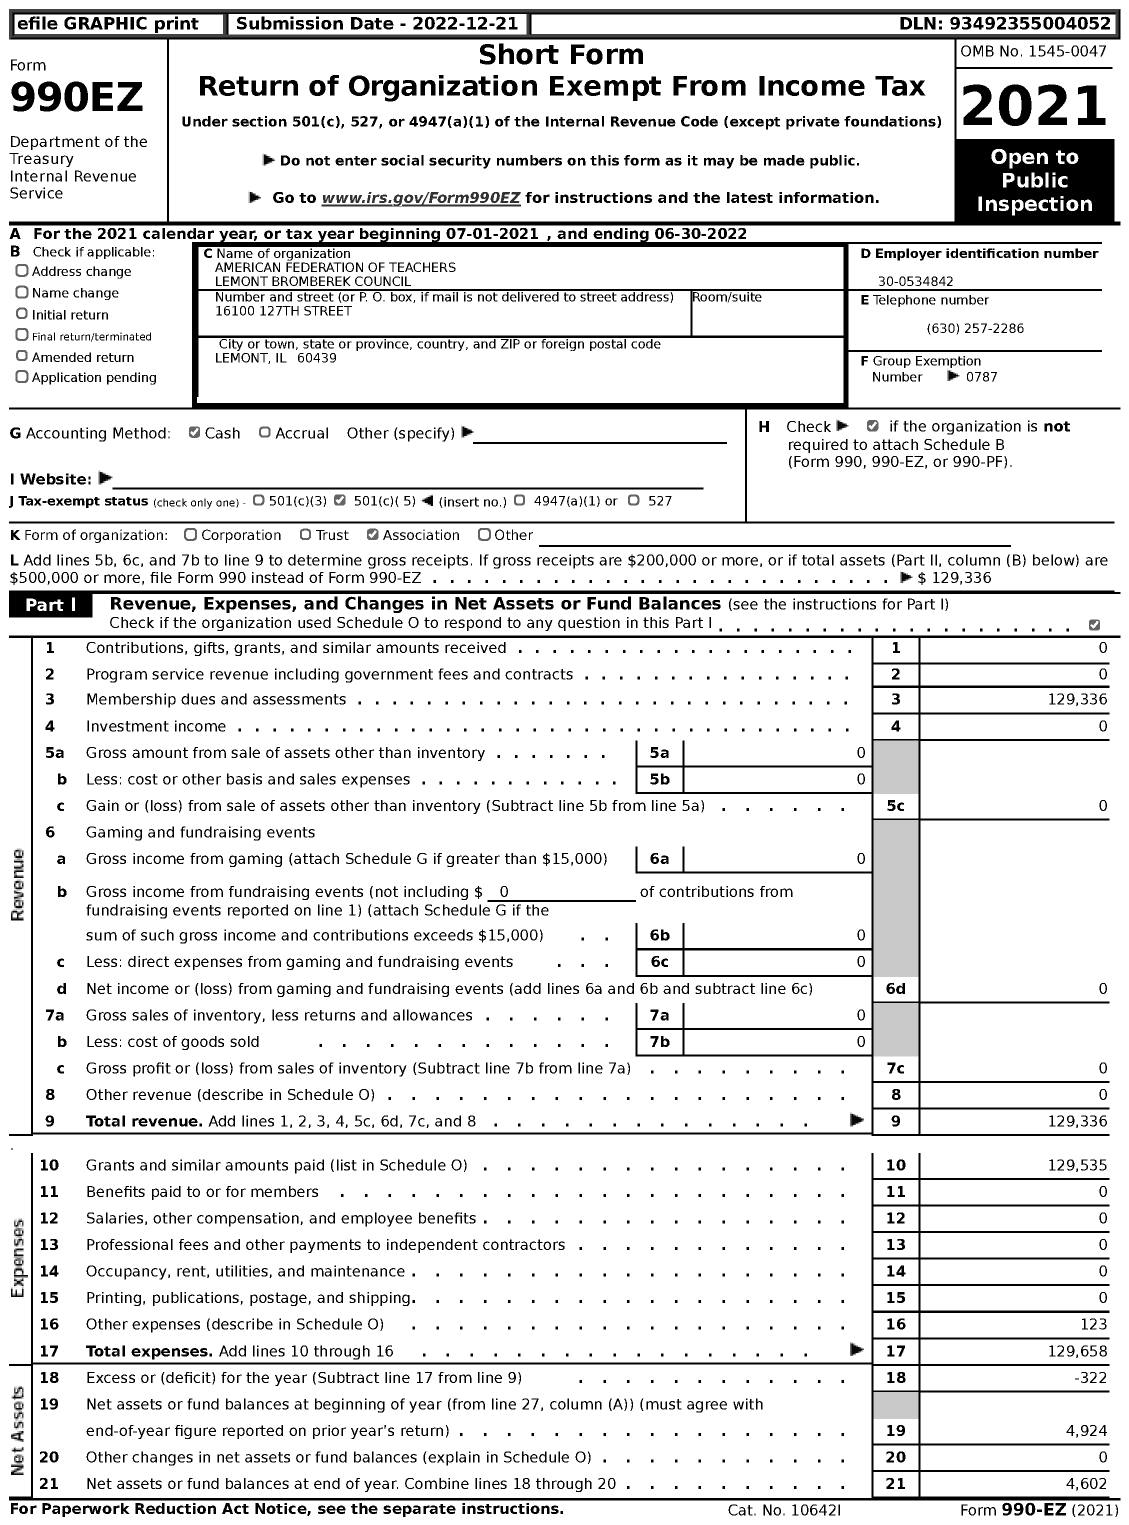 Image of first page of 2021 Form 990EZ for American Federation of Teachers - 6568 Lemont Bromerek Council